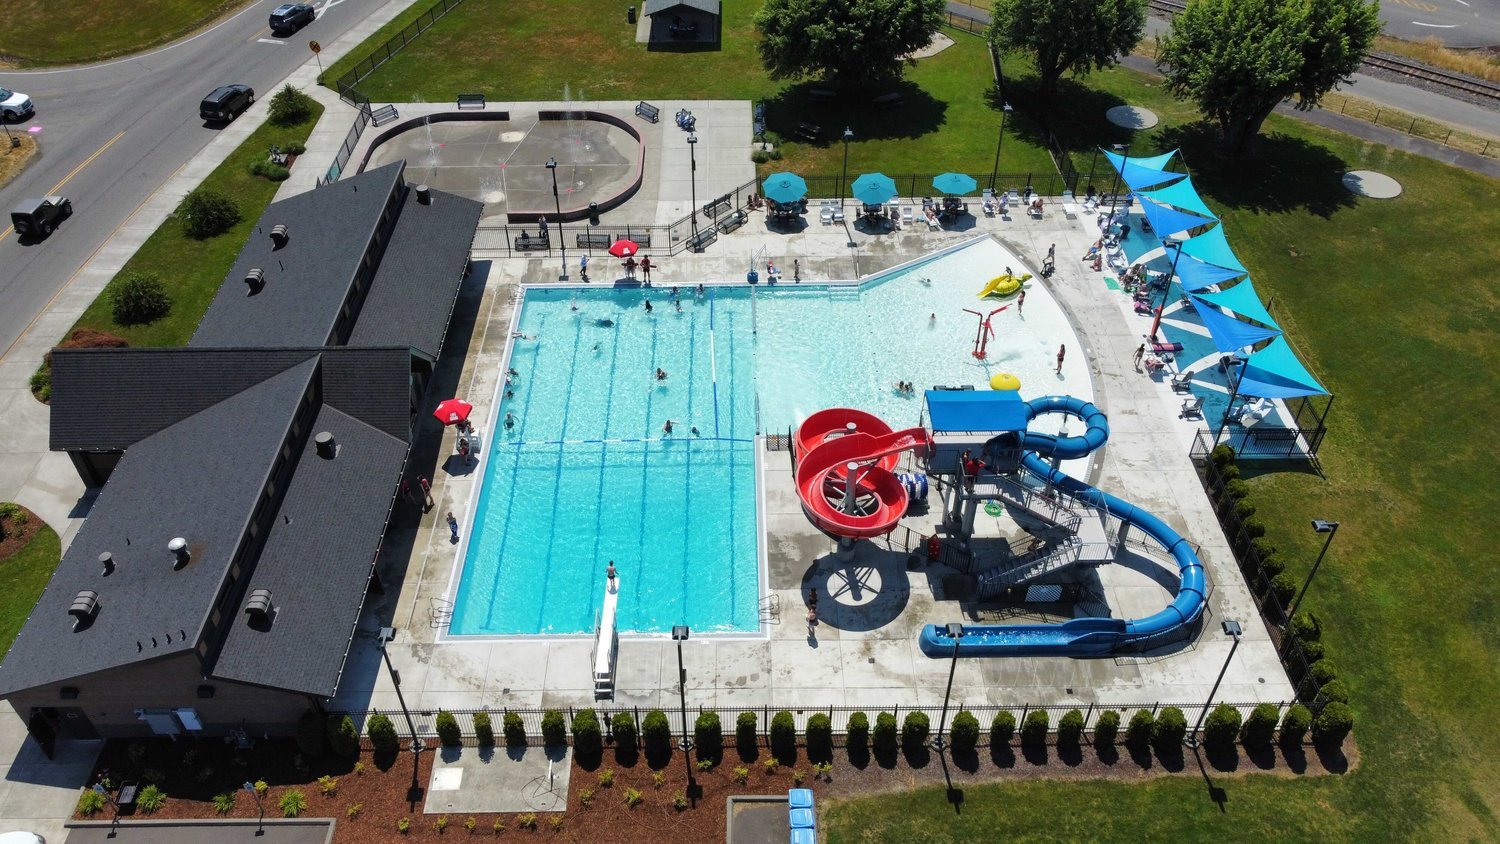 The Gail and Carolyn Shaw Aquatics Center, pictured from above here, opened for the summer season this week.